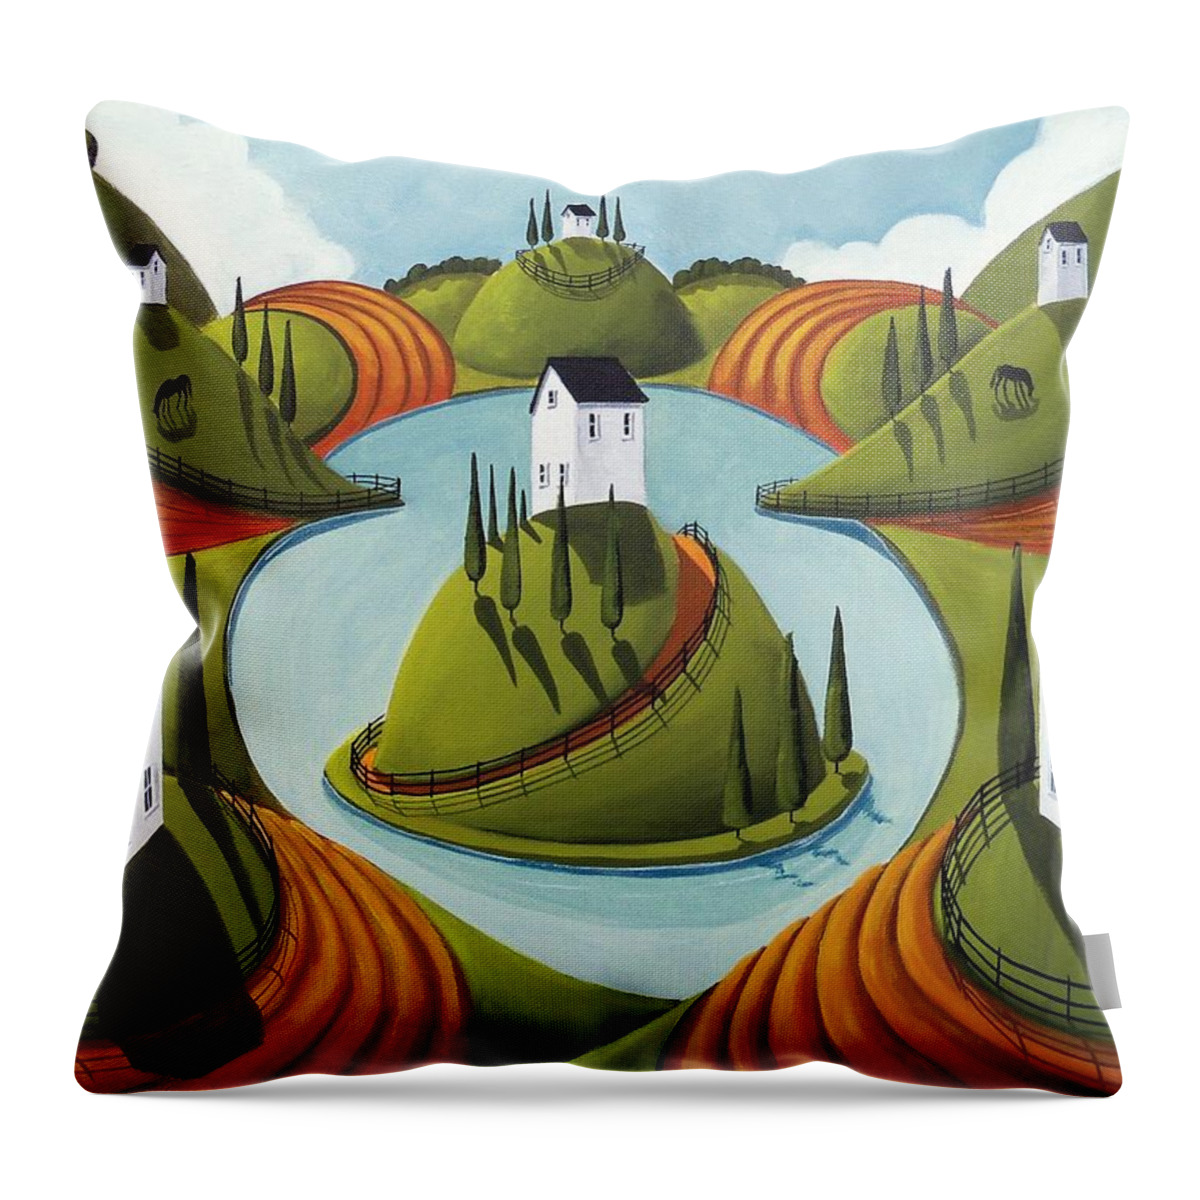 Surreal Throw Pillow featuring the painting Floating Hill - surreal country landscape by Debbie Criswell